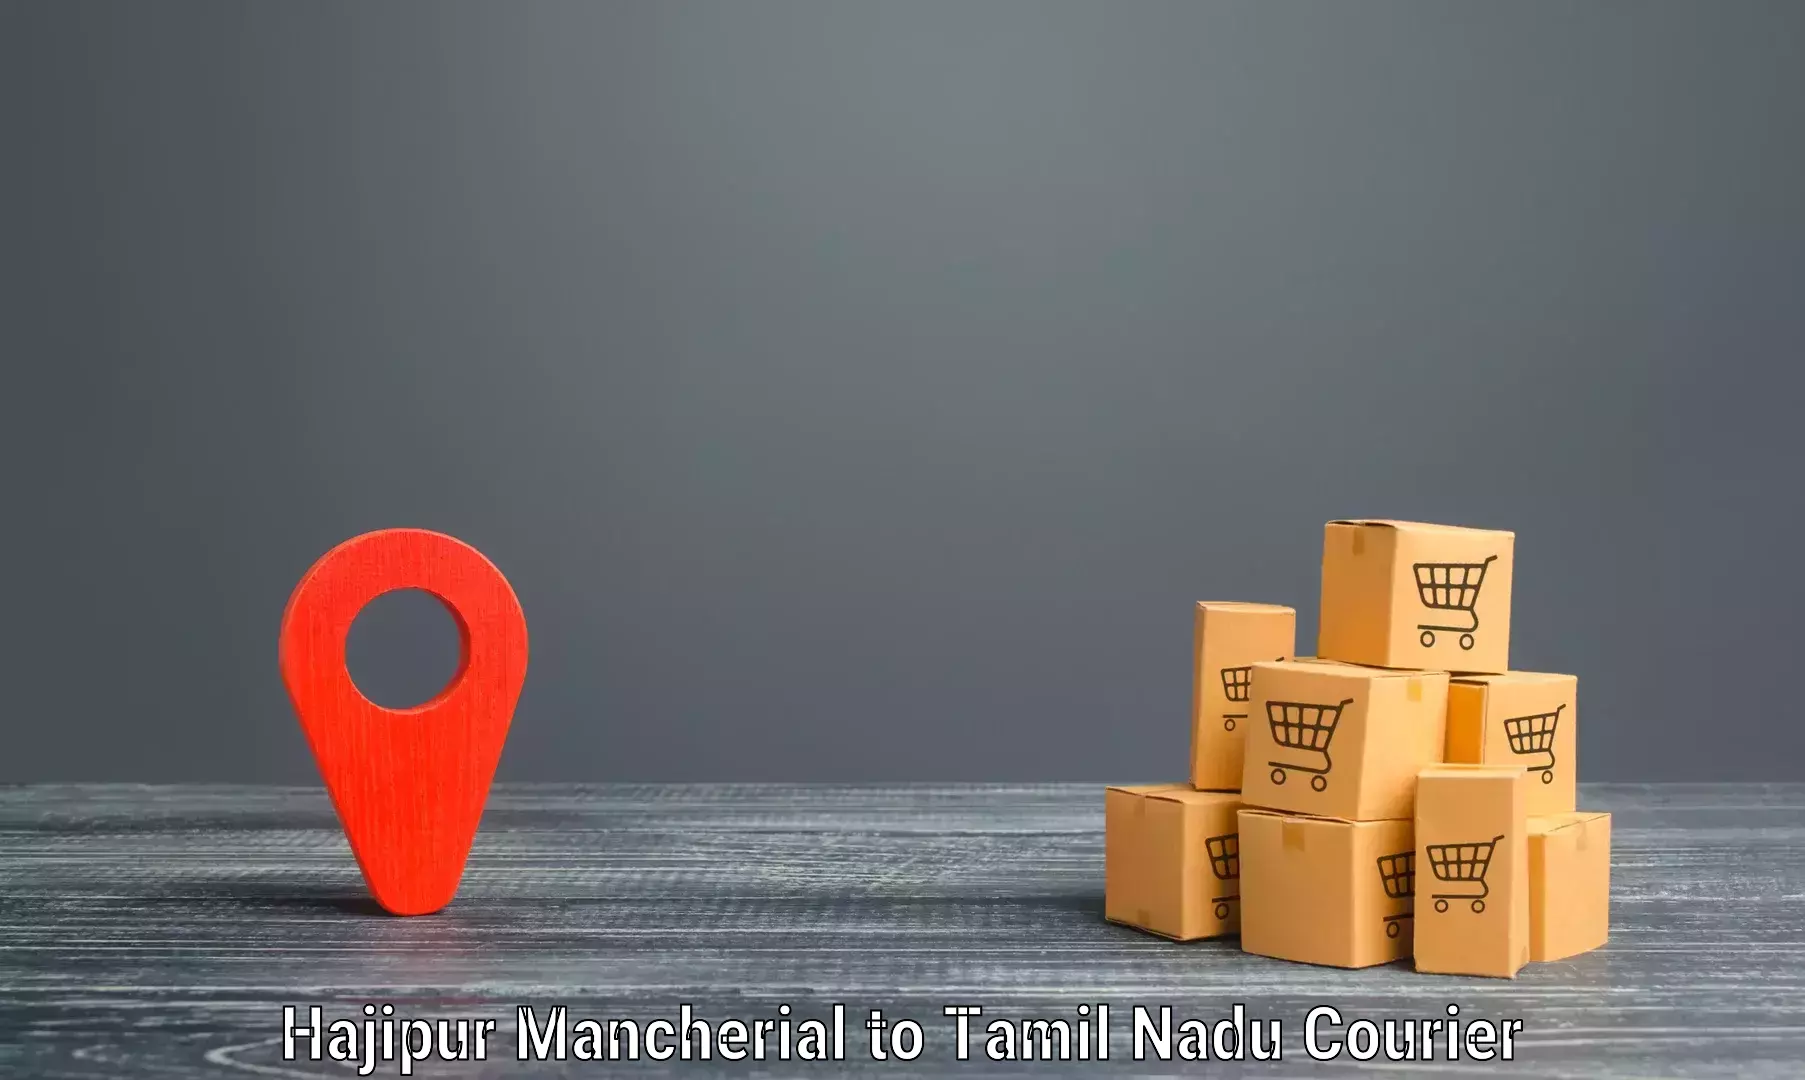 Automated shipping processes Hajipur Mancherial to Vellore